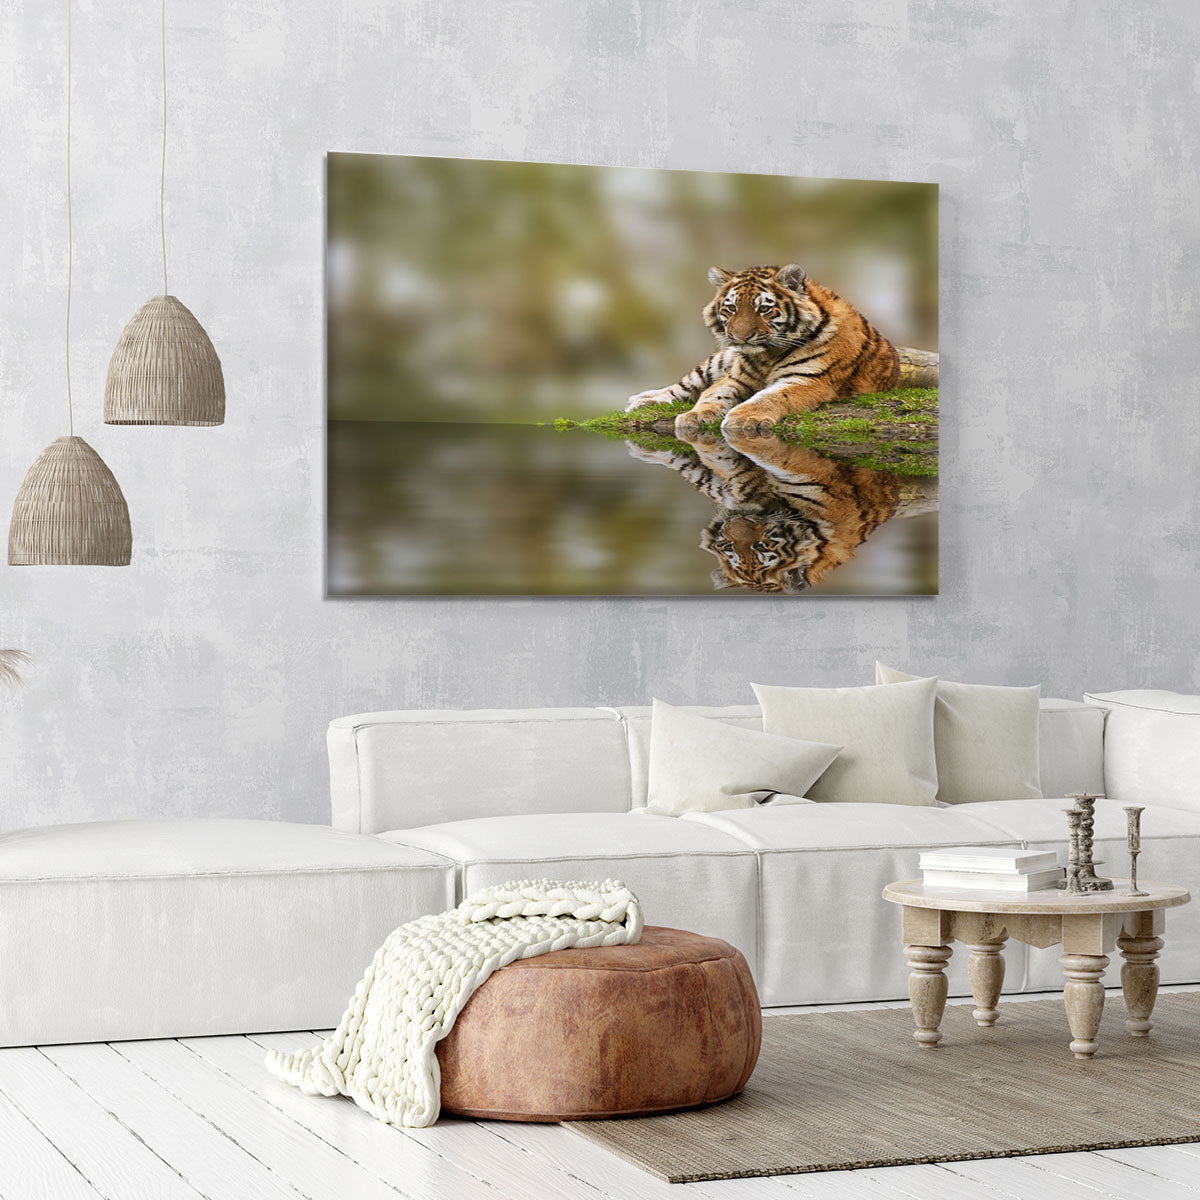 Sttunning tiger cub relaxing on a warm day Canvas Print or Poster - Canvas Art Rocks - 6